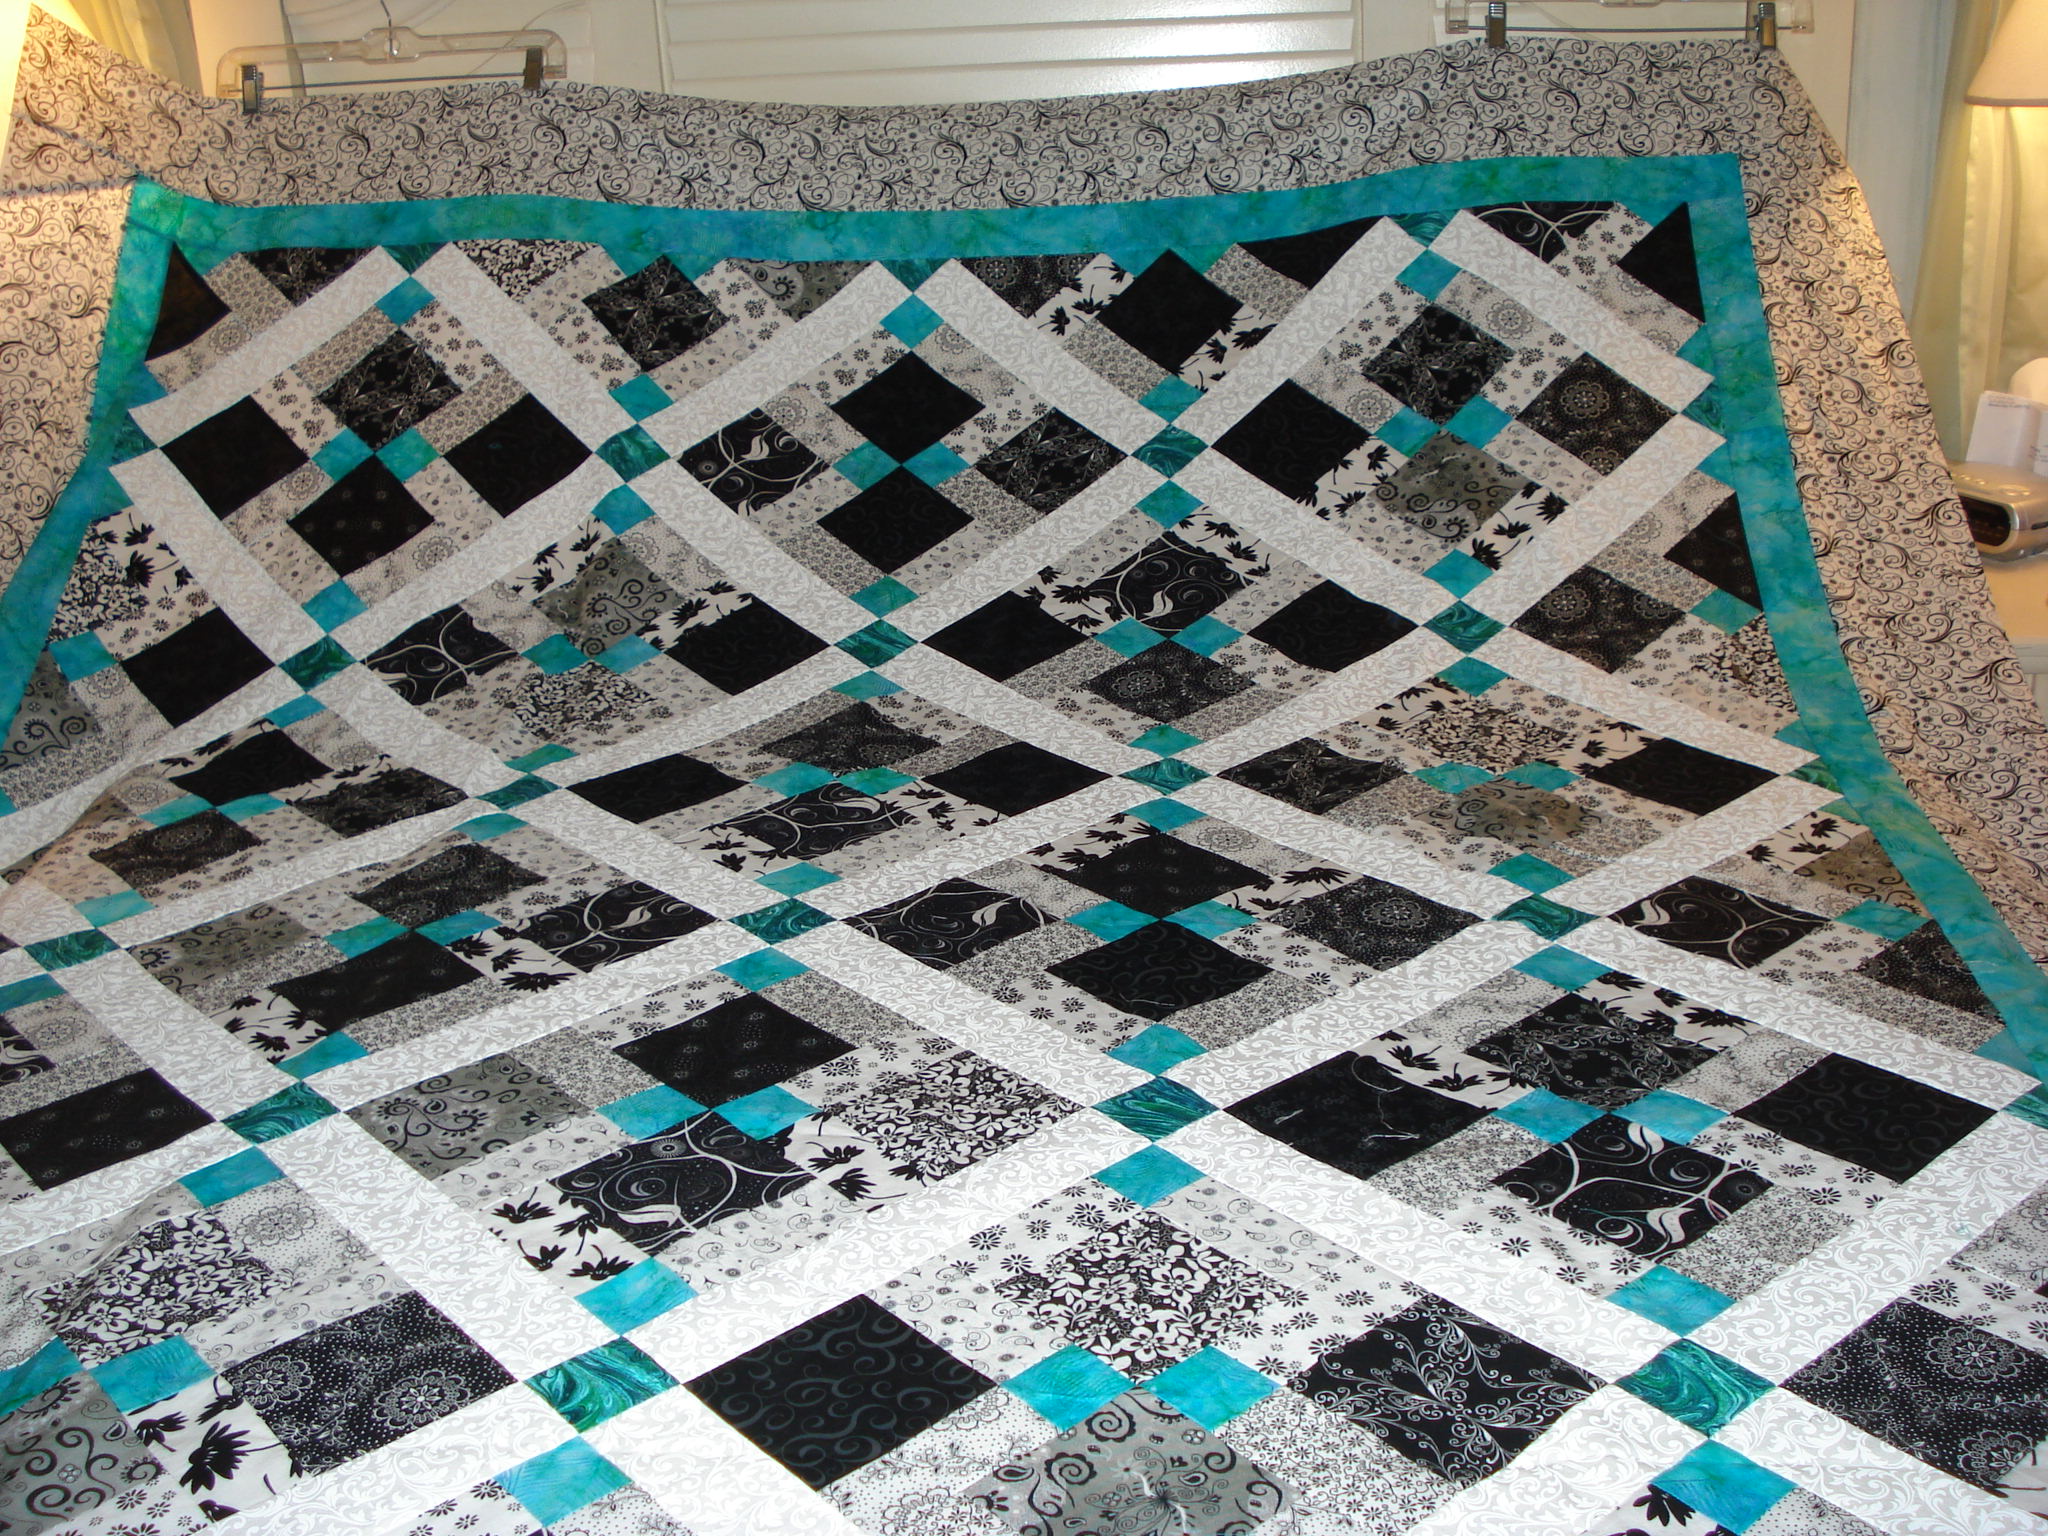 question-son-disappearing-9-patch-quiltingboard-forums